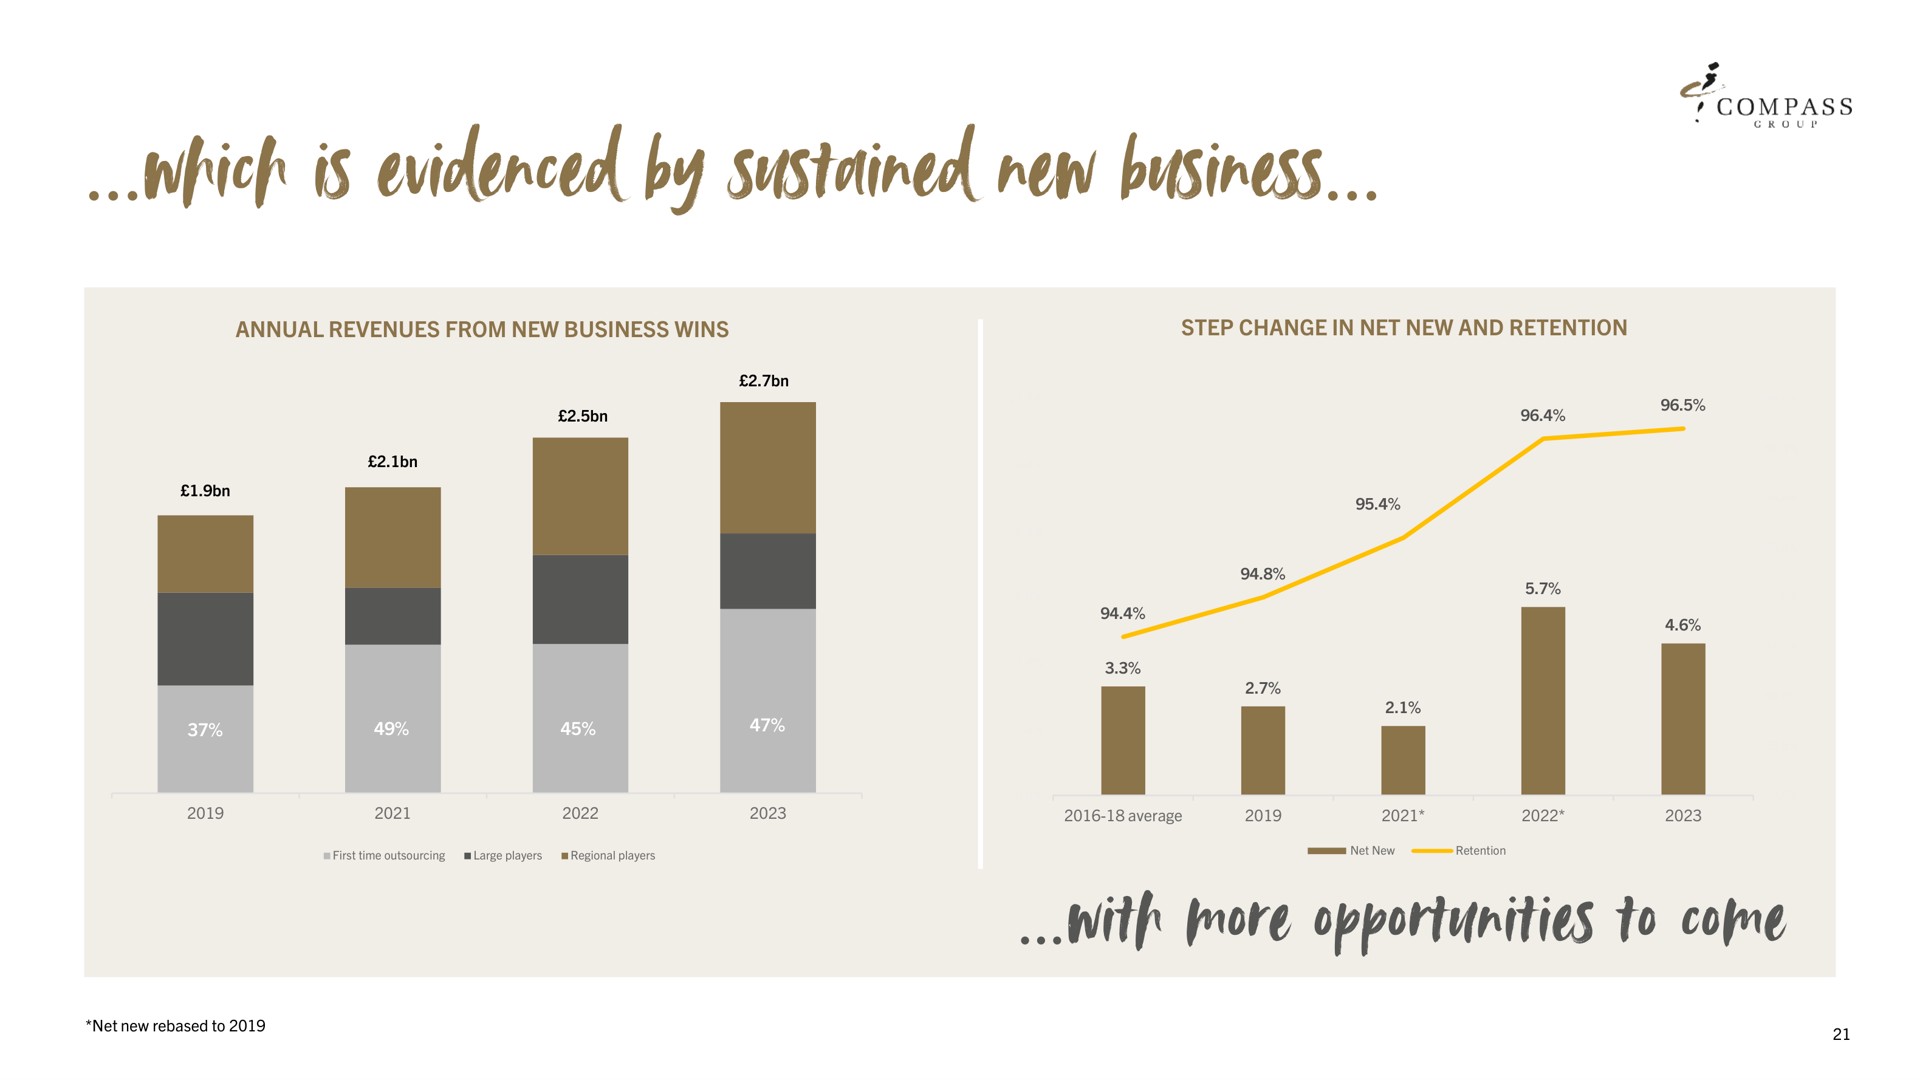 which is evidenced by sustained new business with frore opportunities to come | Compass Group